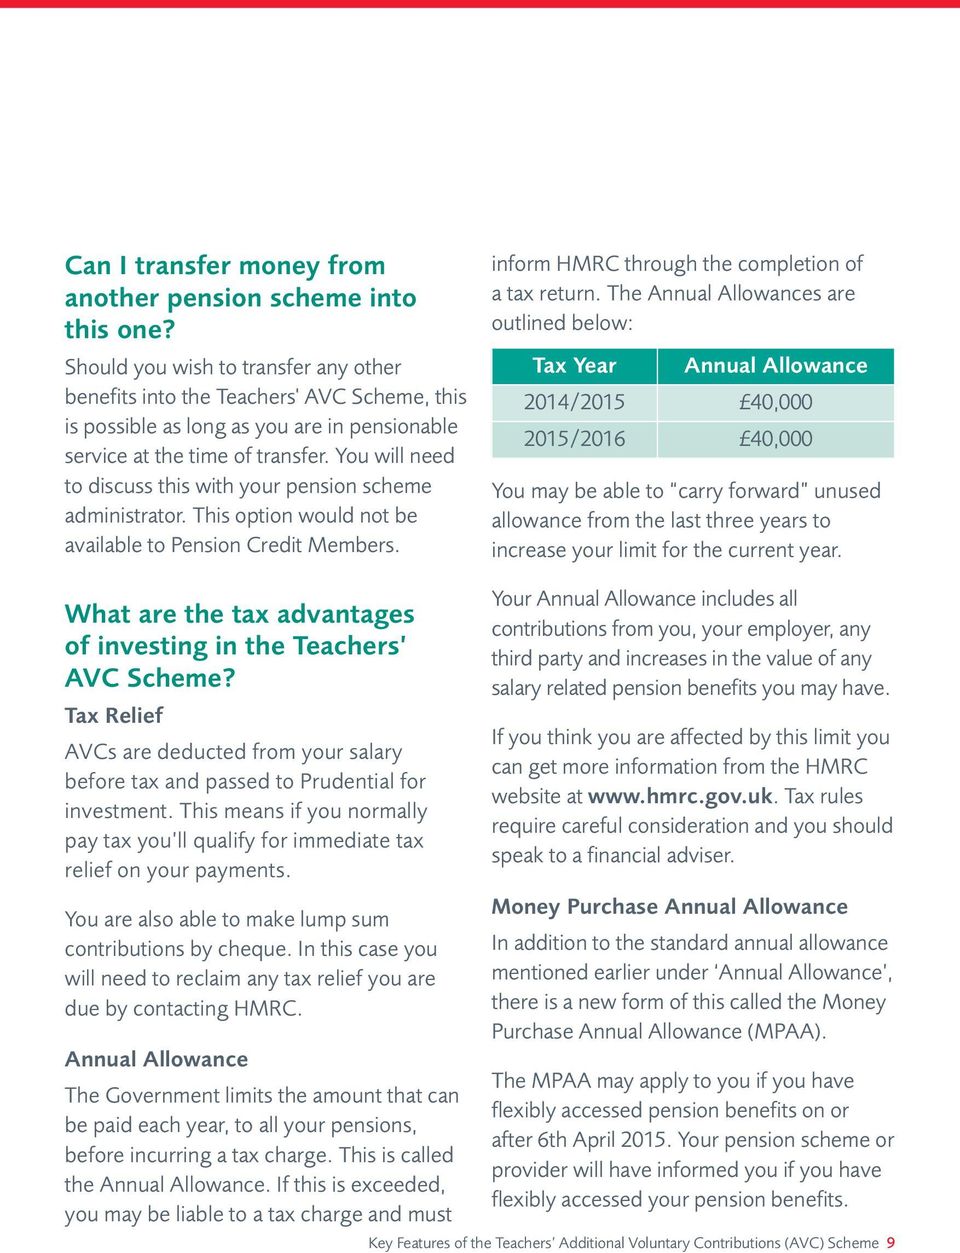 You will need to discuss this with your pension scheme administrator. This option would not be available to Pension Credit Members. inform HMRC through the completion of a tax return.